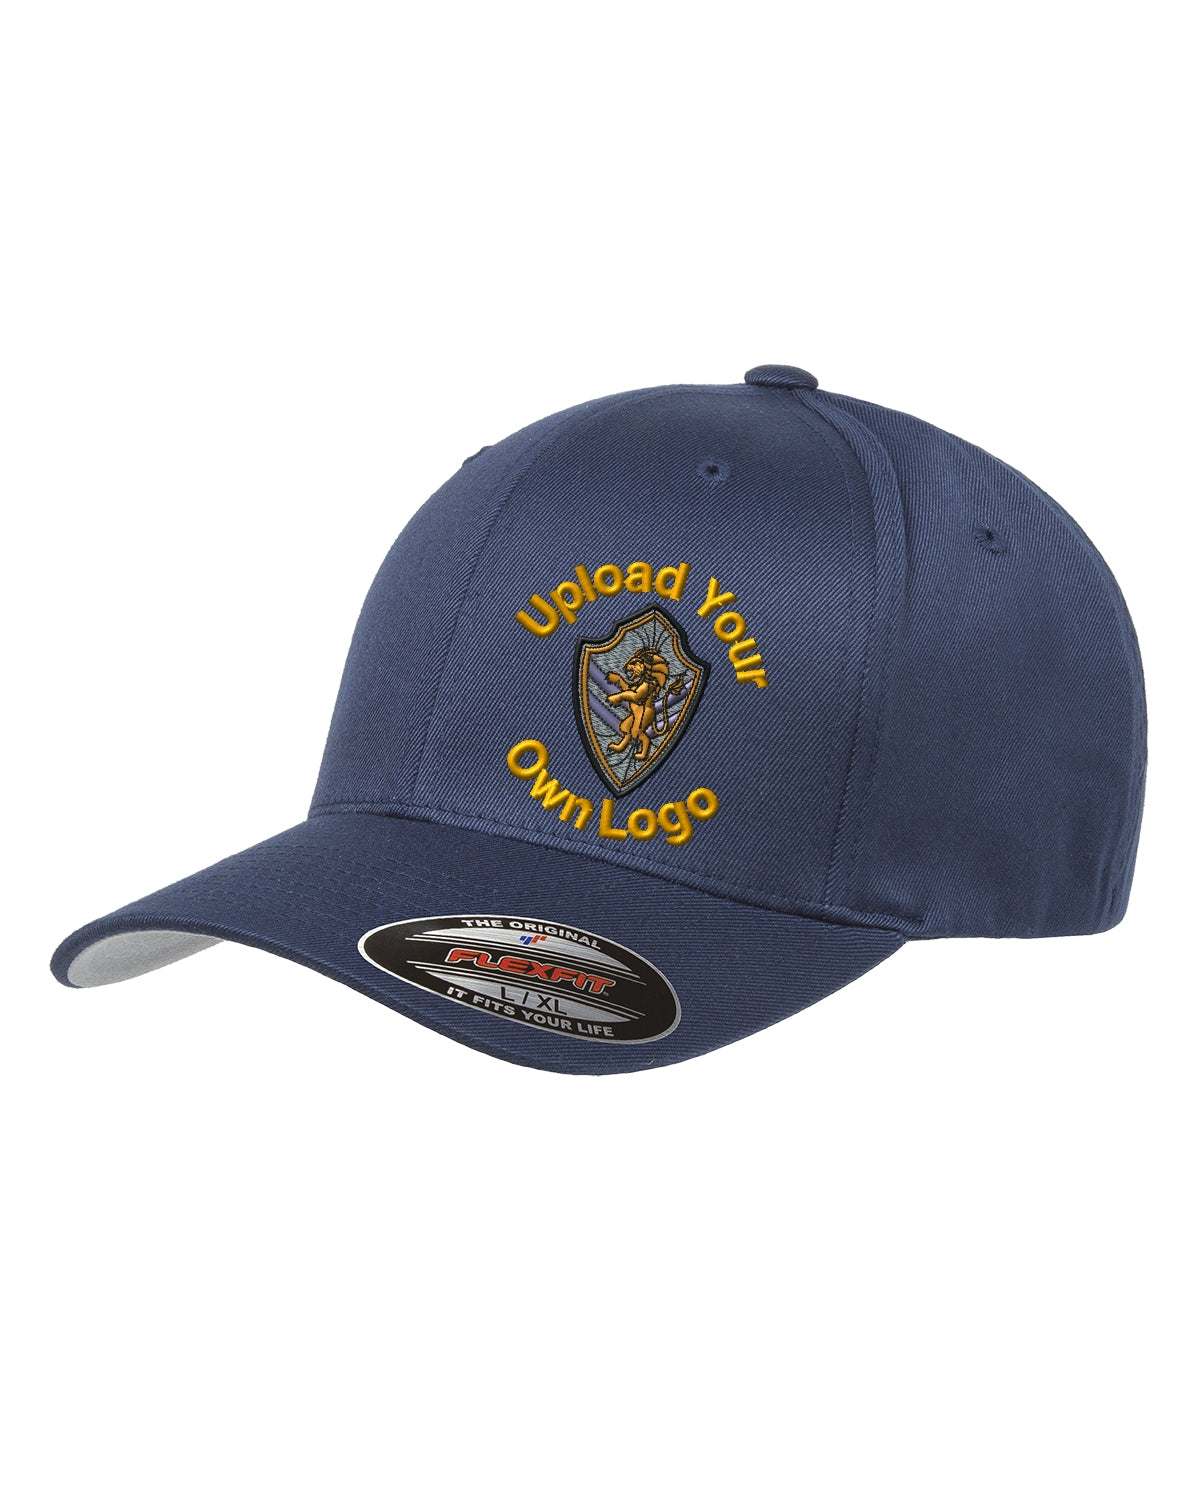 Flex Fitted Ball Cap with Your Company Logo Embroidered - charcoal